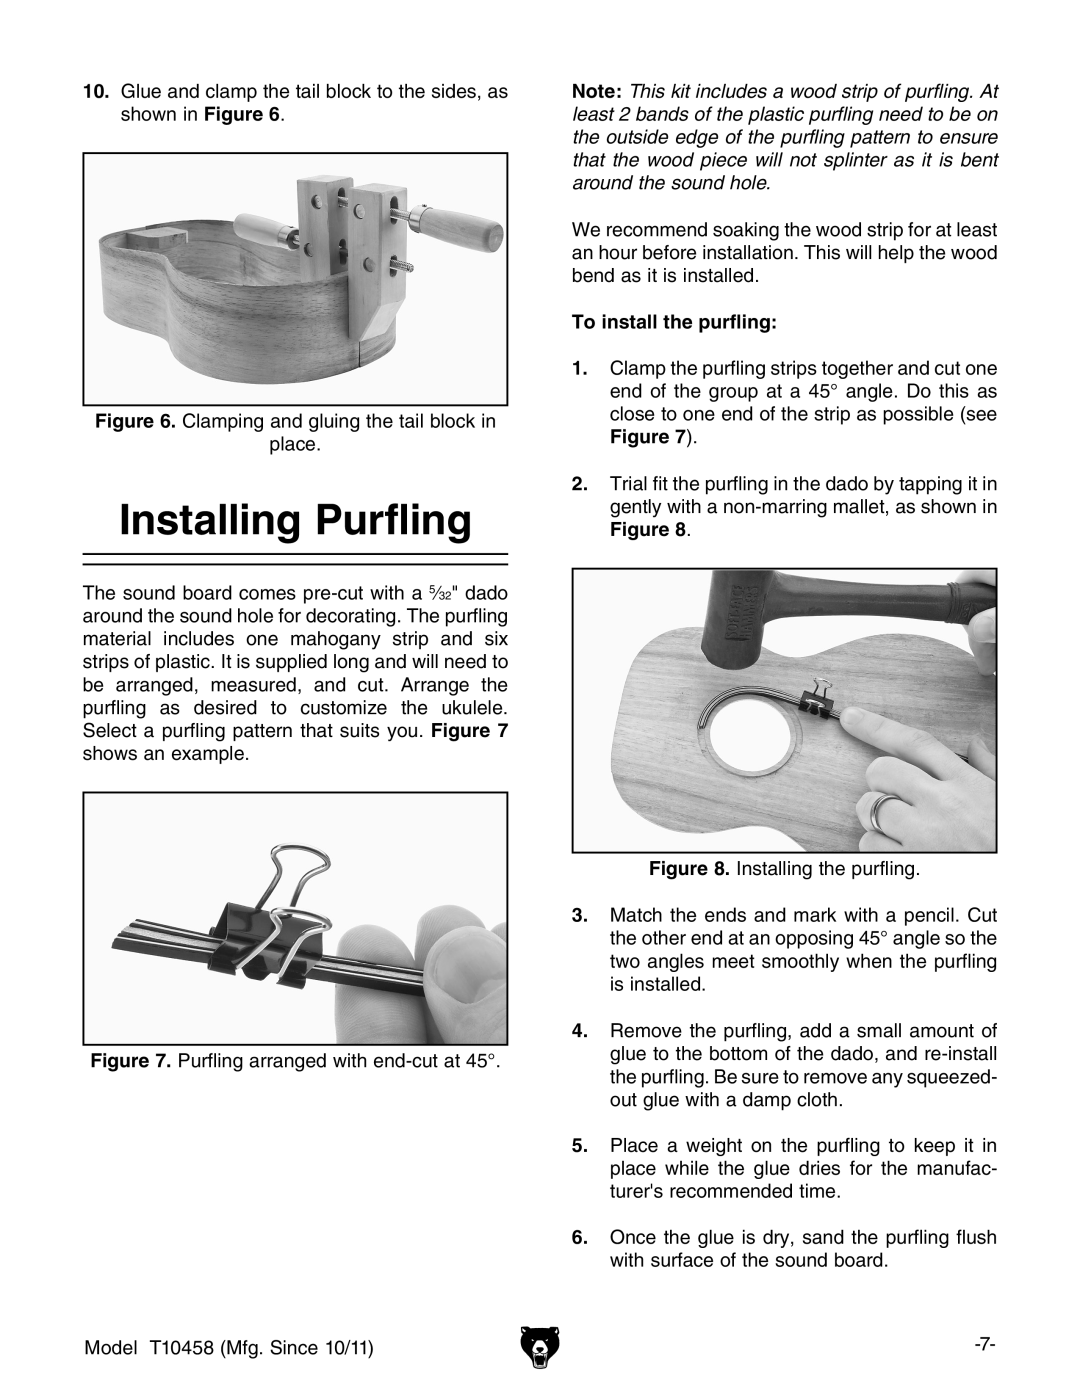 Grizzly T10458 instruction manual Installing Purfling, To install the purfling 